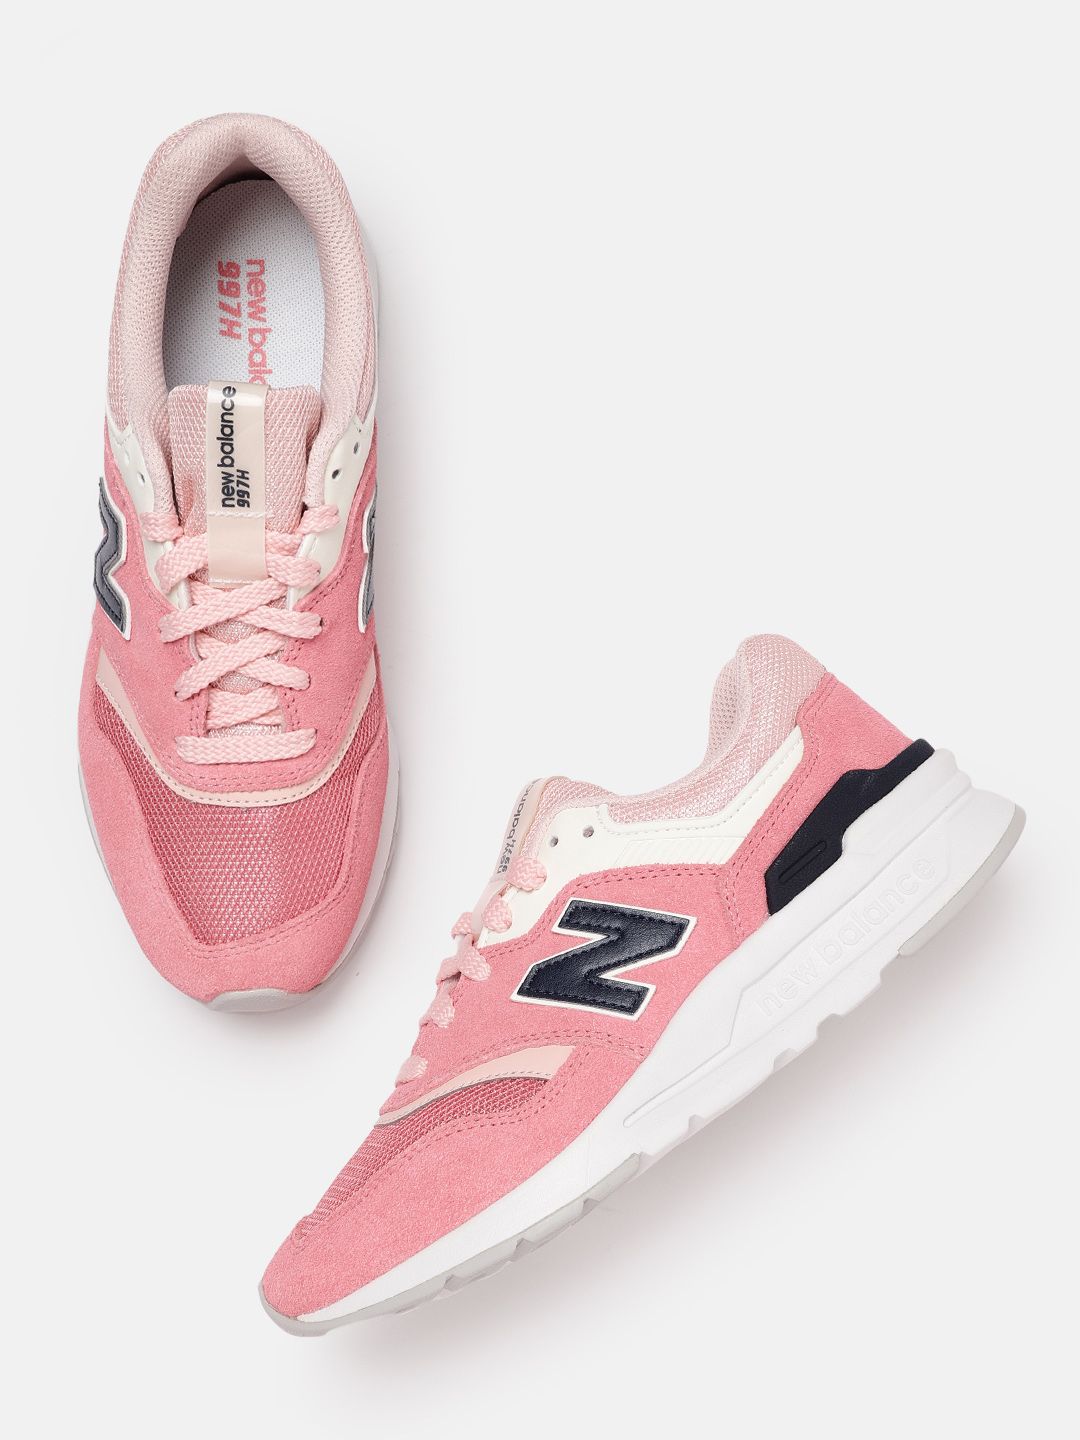 New Balance Women Pink Woven Design Suede Sneakers Price in India